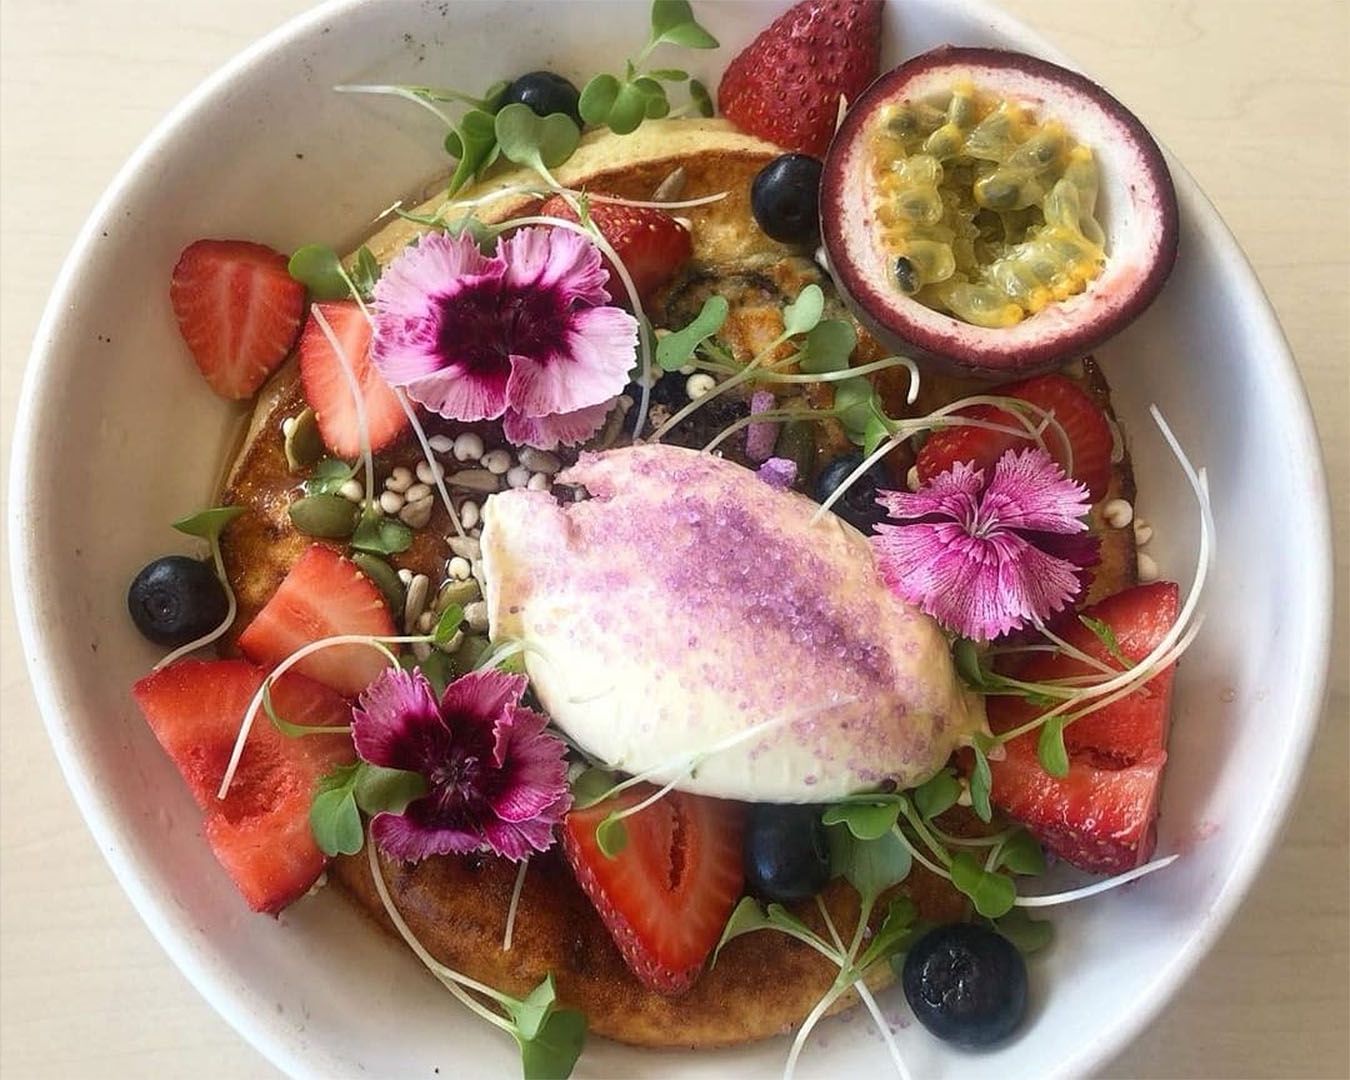 A delicious blueberry hotcake sits pretty on the plate at Bambina Newmarket.